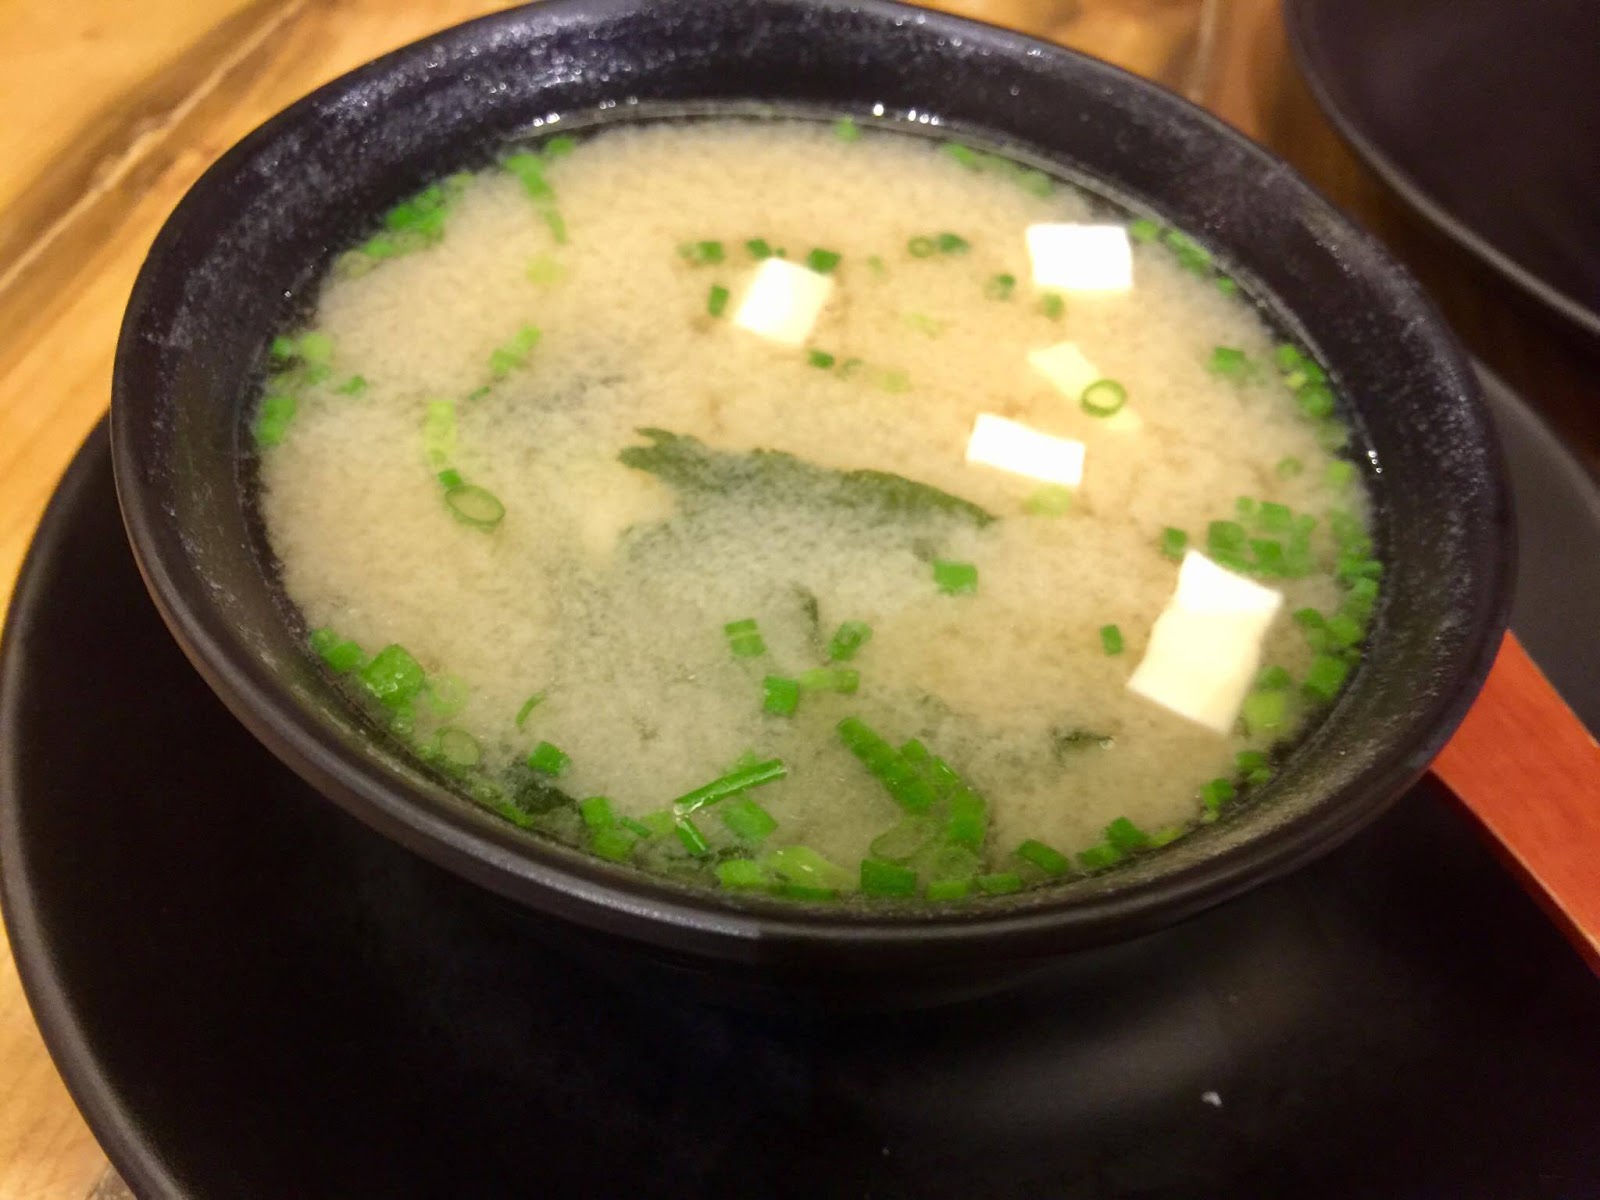 Ooma's Miso Soup (php75)